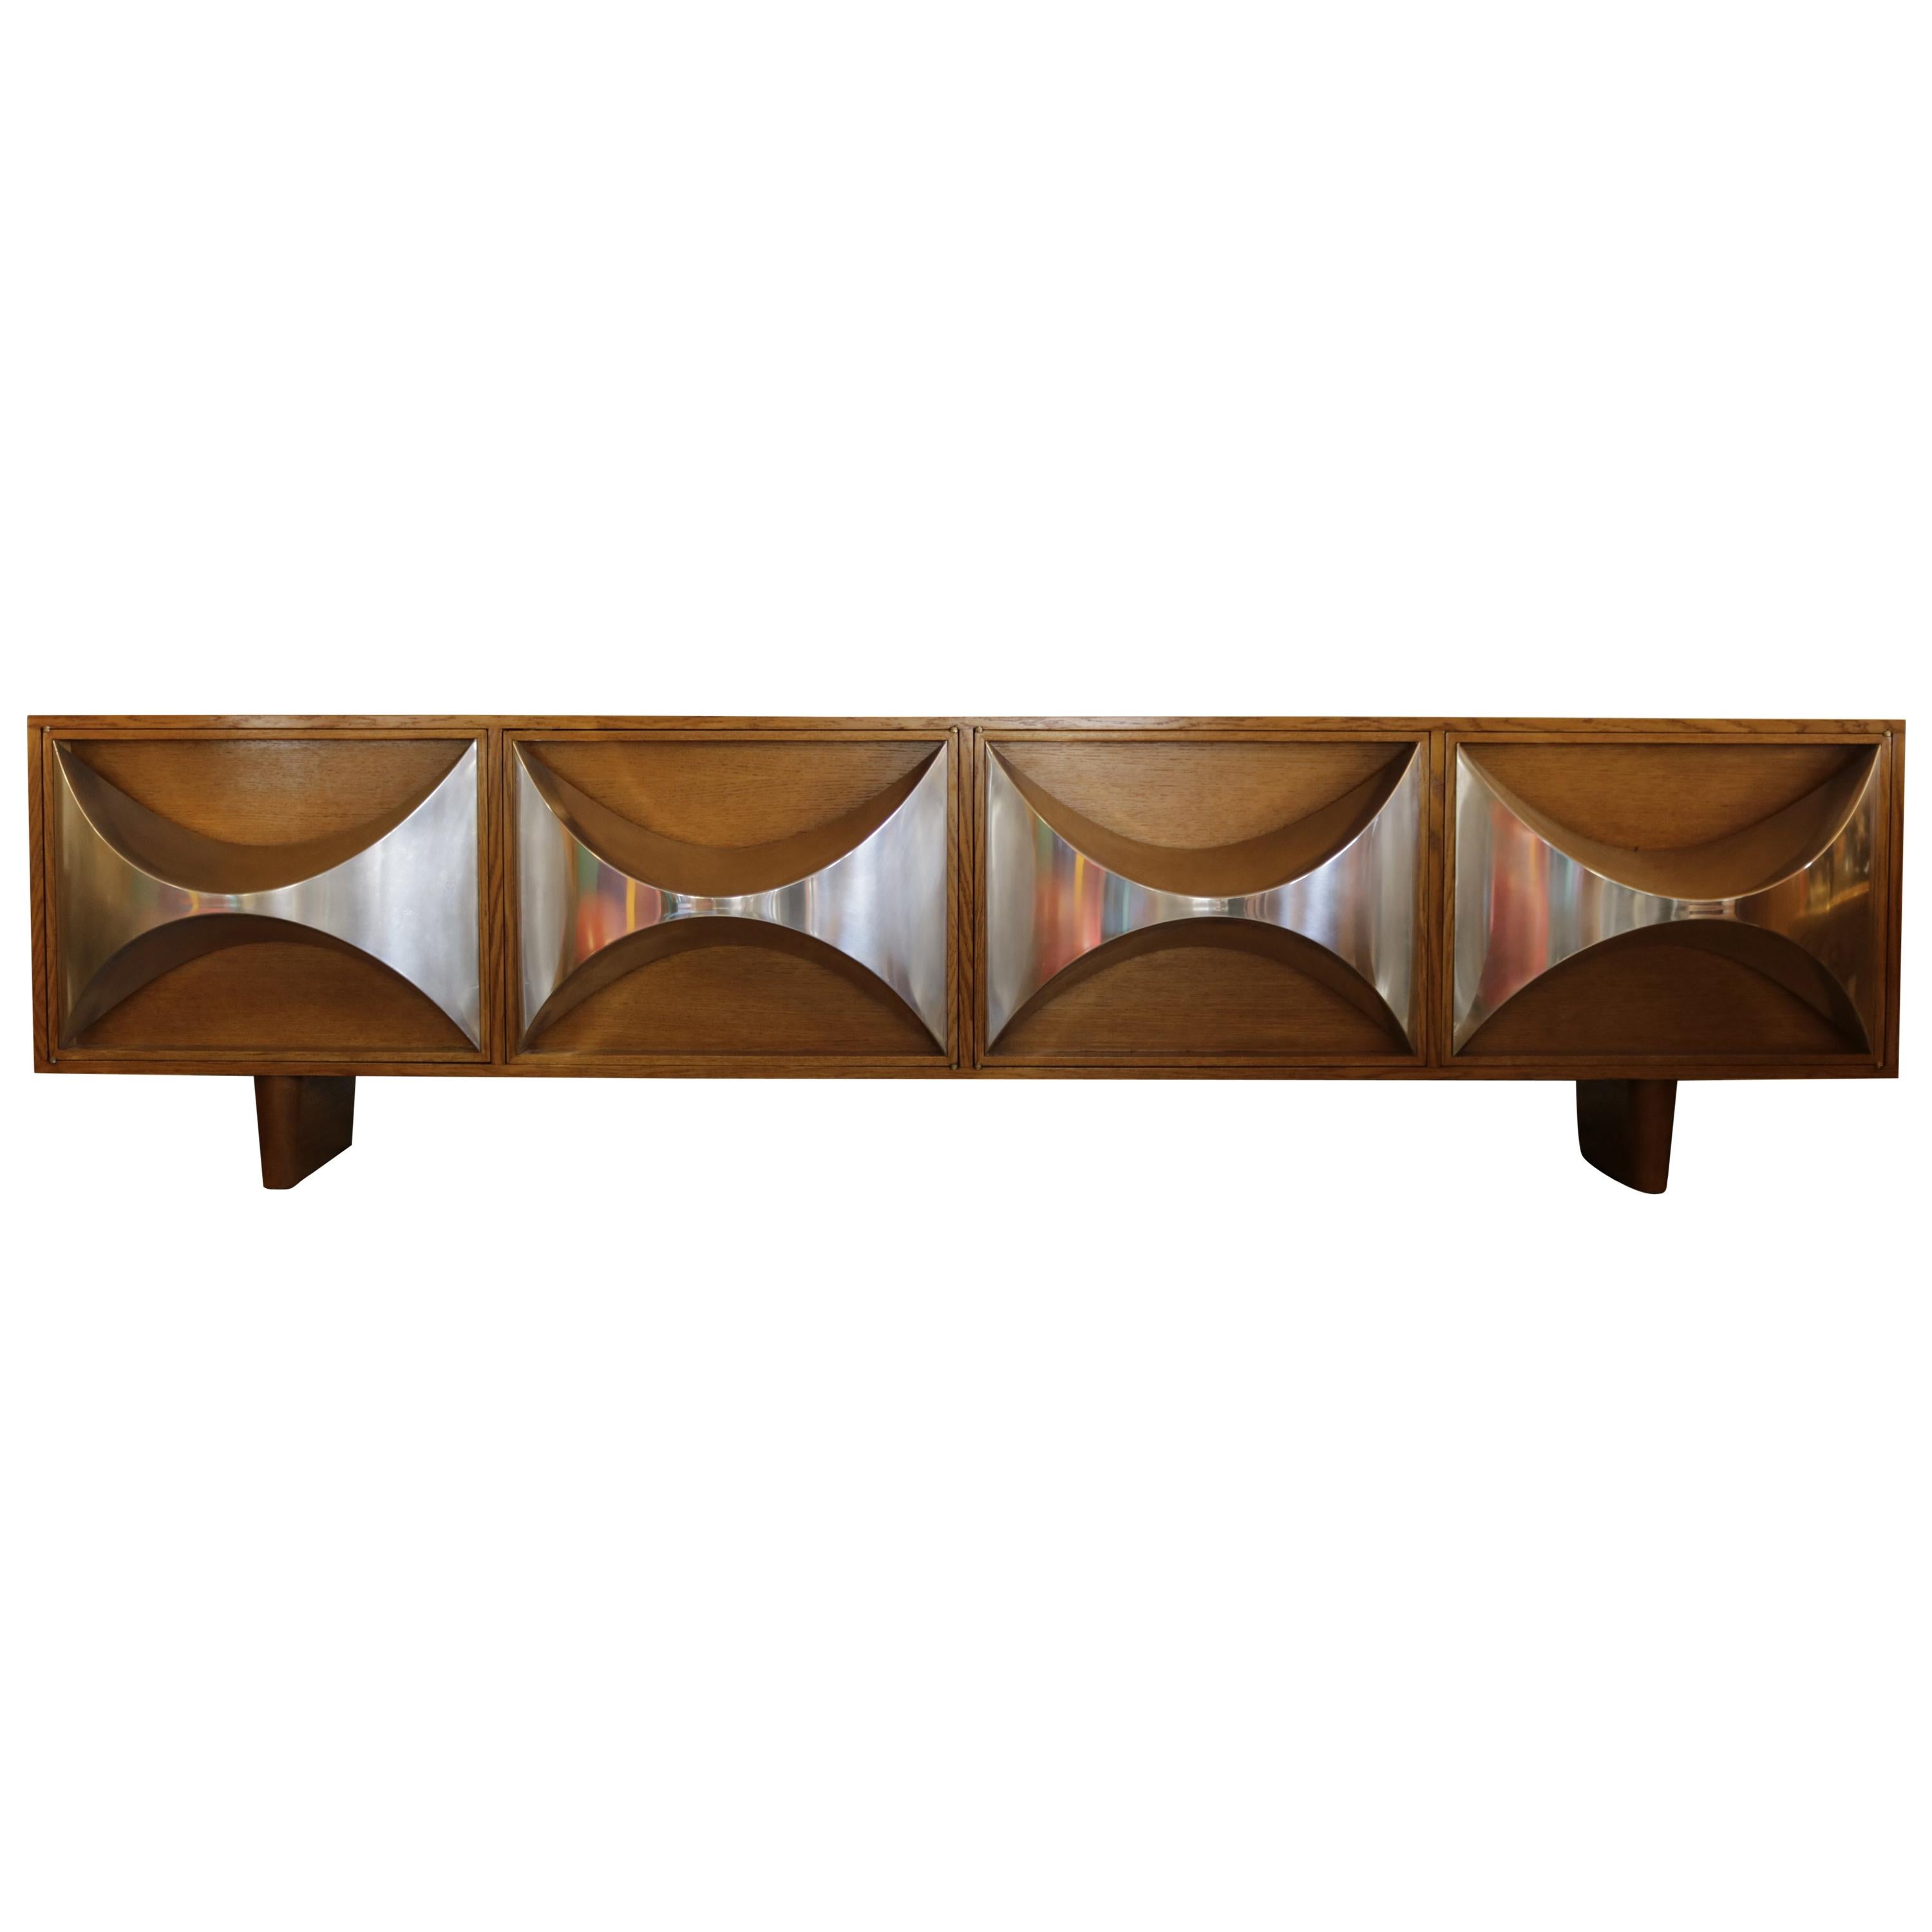 Pair of 1970s Chrome Accented Walnut Credenzas by Raphael